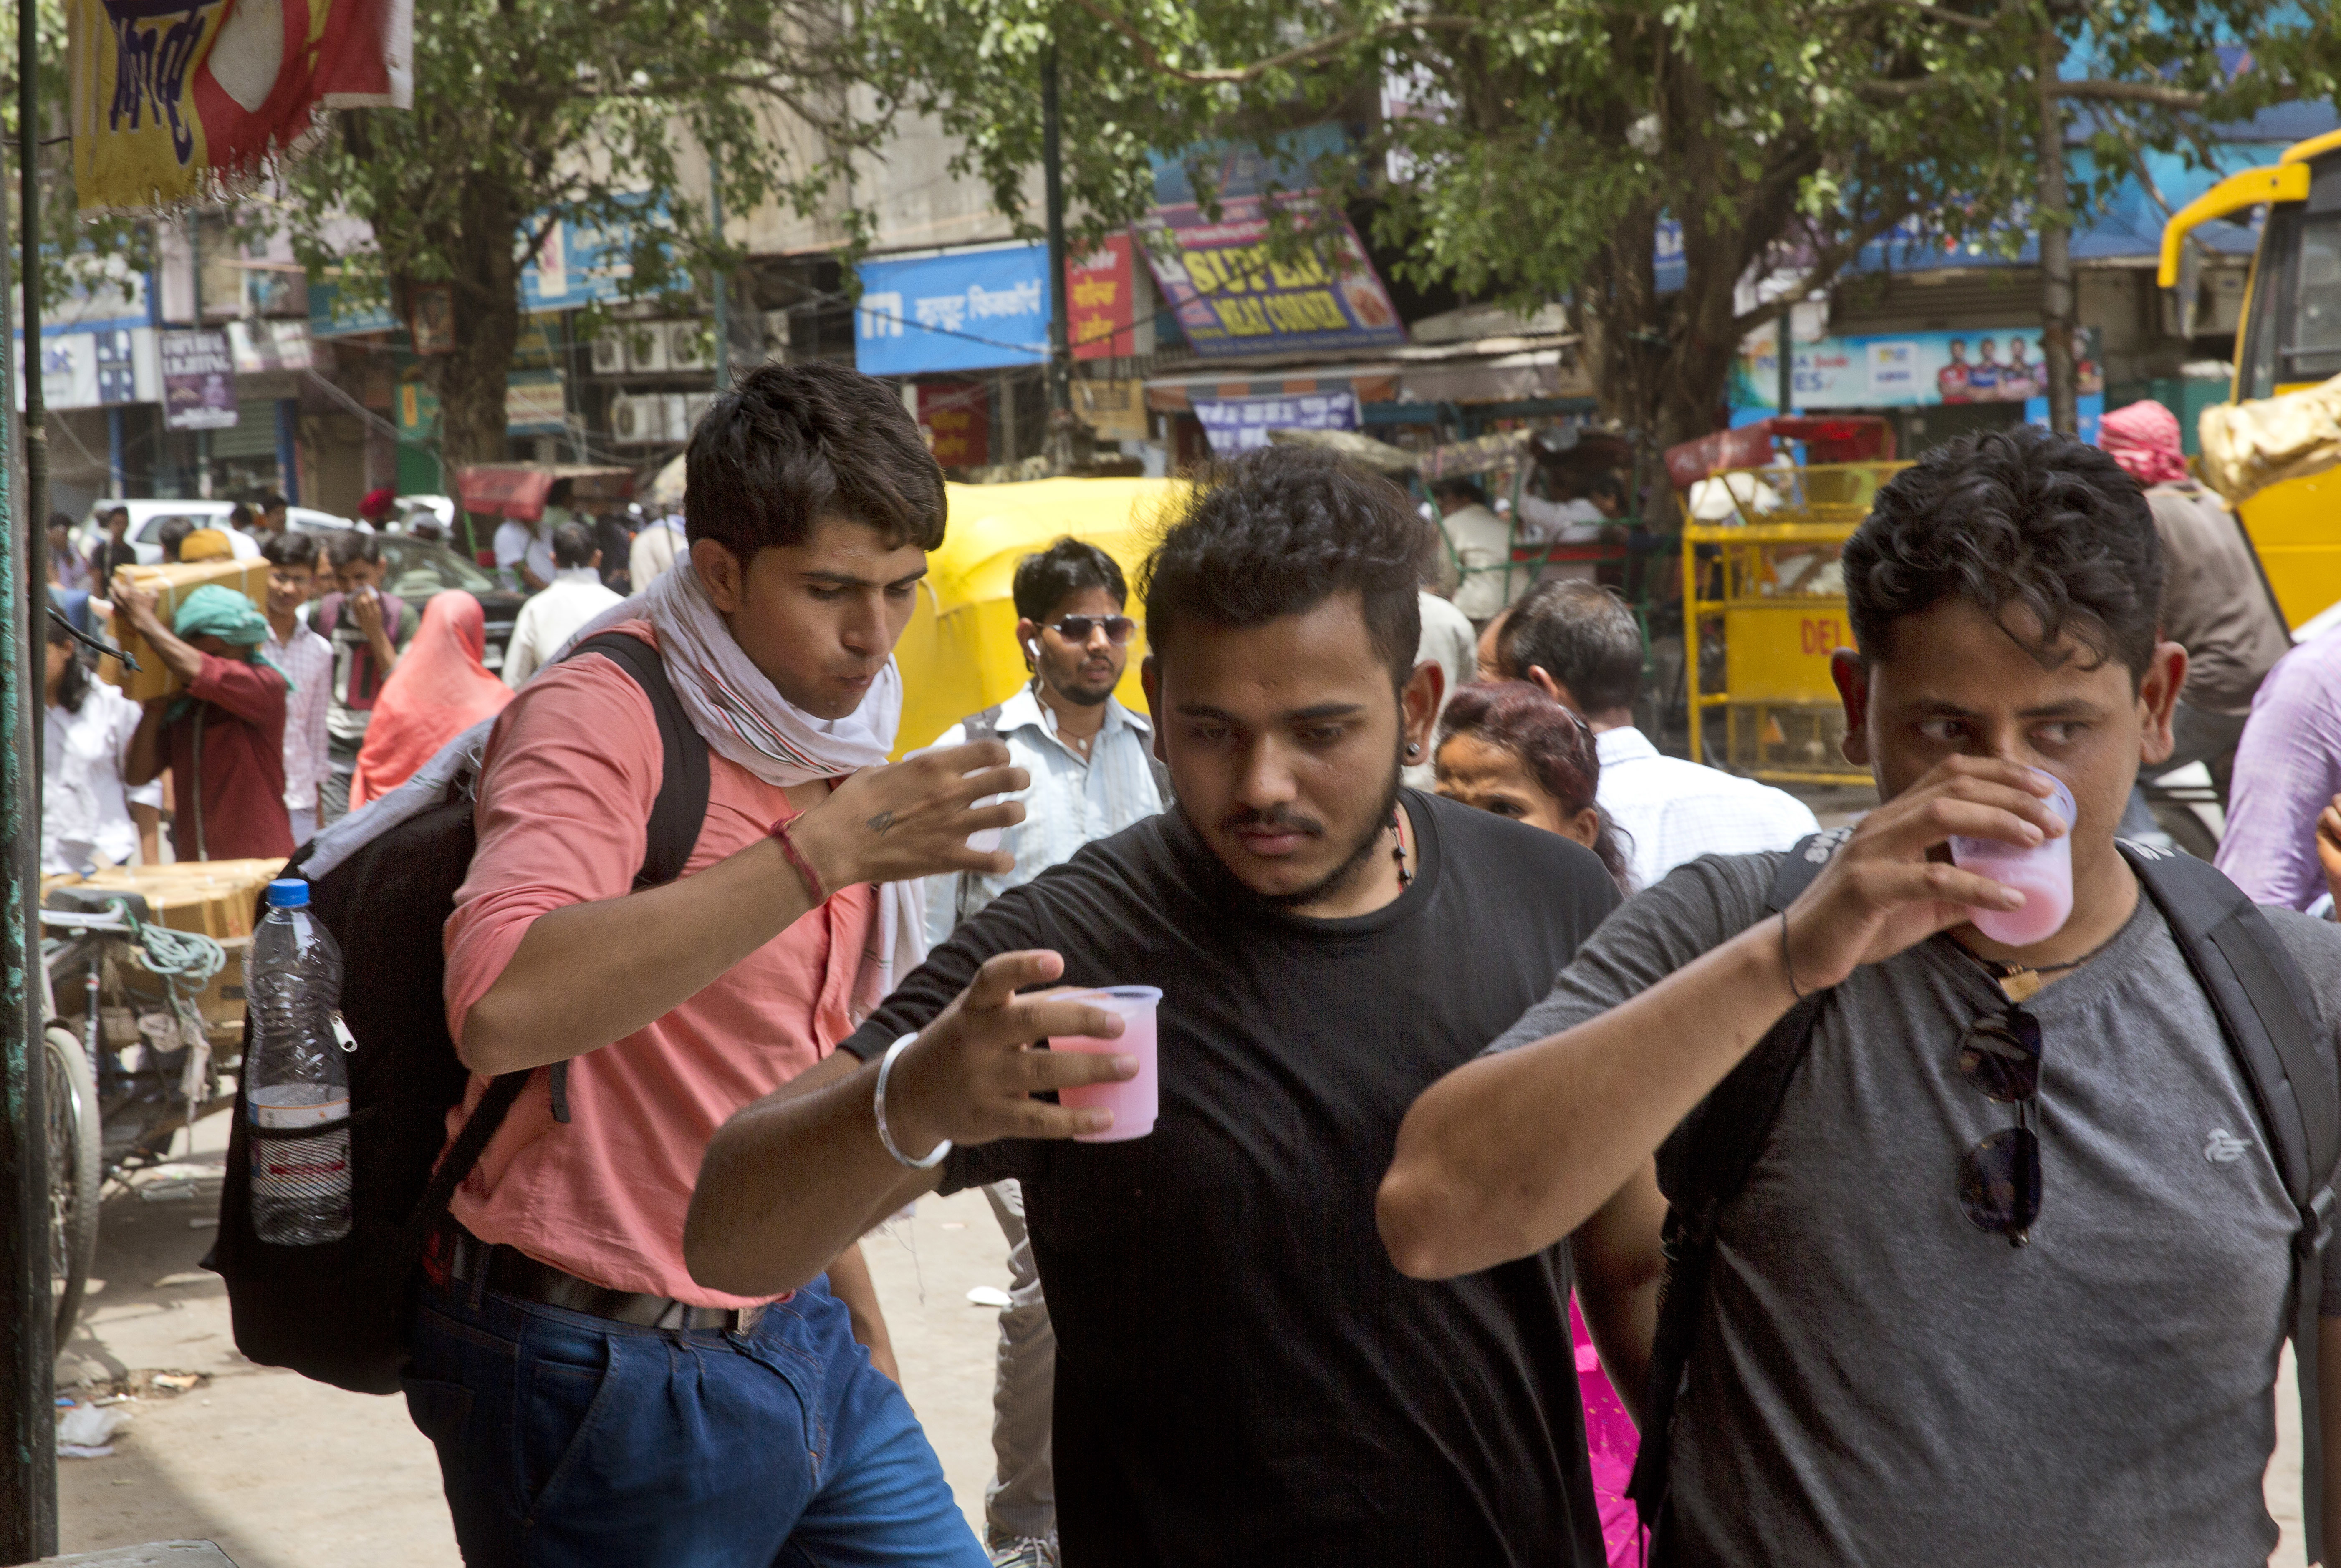 Indian commuters drink sweetened water being freely distributed by the wayside on a hot summer afternoon in New Delhi, India, Monday, June 5, 2017. Most parts of northern India is reeling under intense heat wave conditions with the temperature crossing over 43 degrees Celsius (109.4 Fahrenheit). (AP Photo/Manish Swarup)